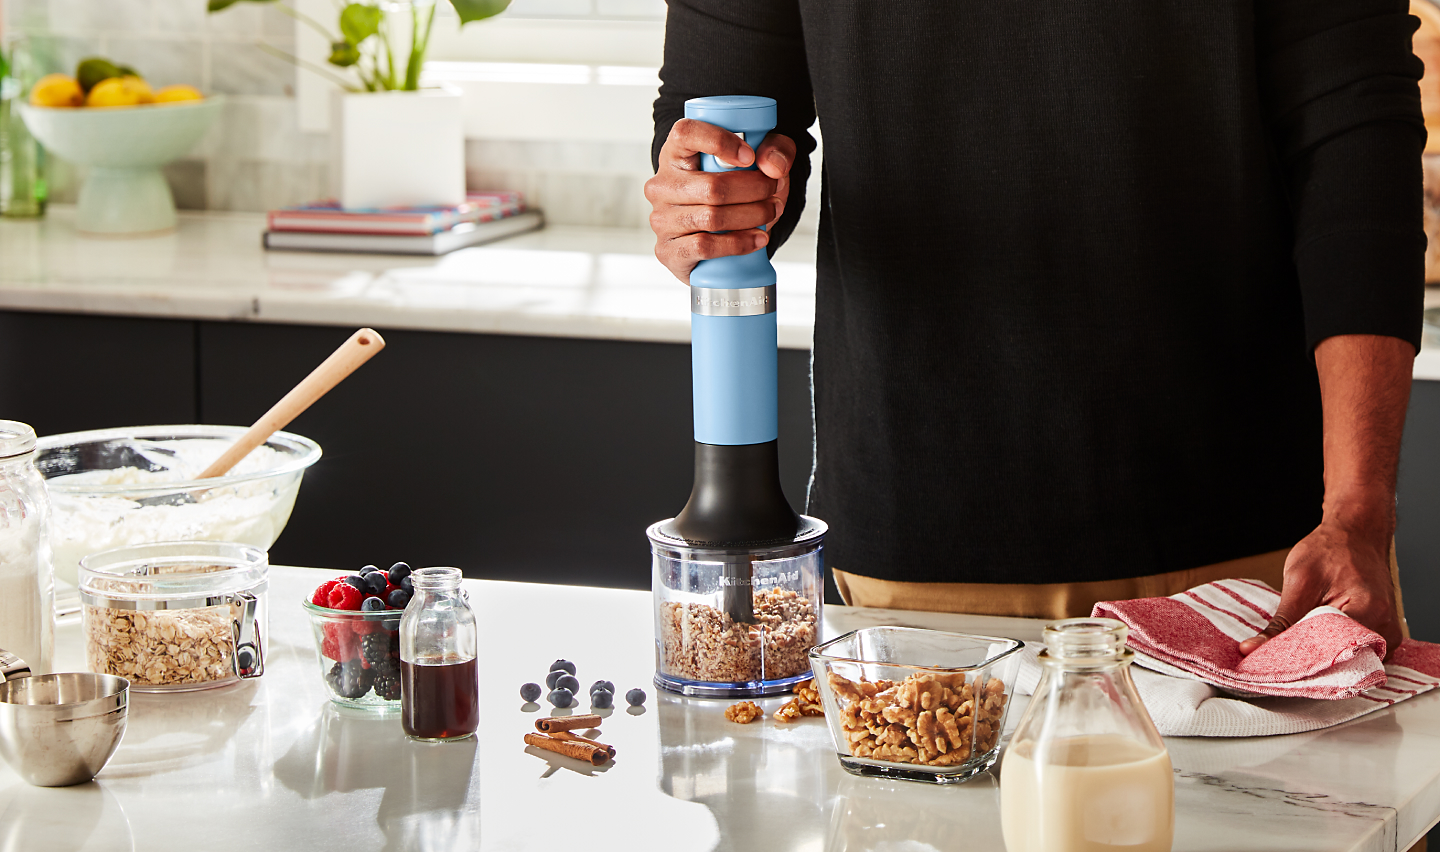 https://kitchenaid-h.assetsadobe.com/is/image/content/dam/business-unit/kitchenaid/en-us/marketing-content/site-assets/page-content/blog/how-to-chop-and-grind-nuts-in-a-food-processor/how-to-chop-grind-nuts-food-processor_4a.jpg?fmt=png-alpha&qlt=85,0&resMode=sharp2&op_usm=1.75,0.3,2,0&scl=1&constrain=fit,1